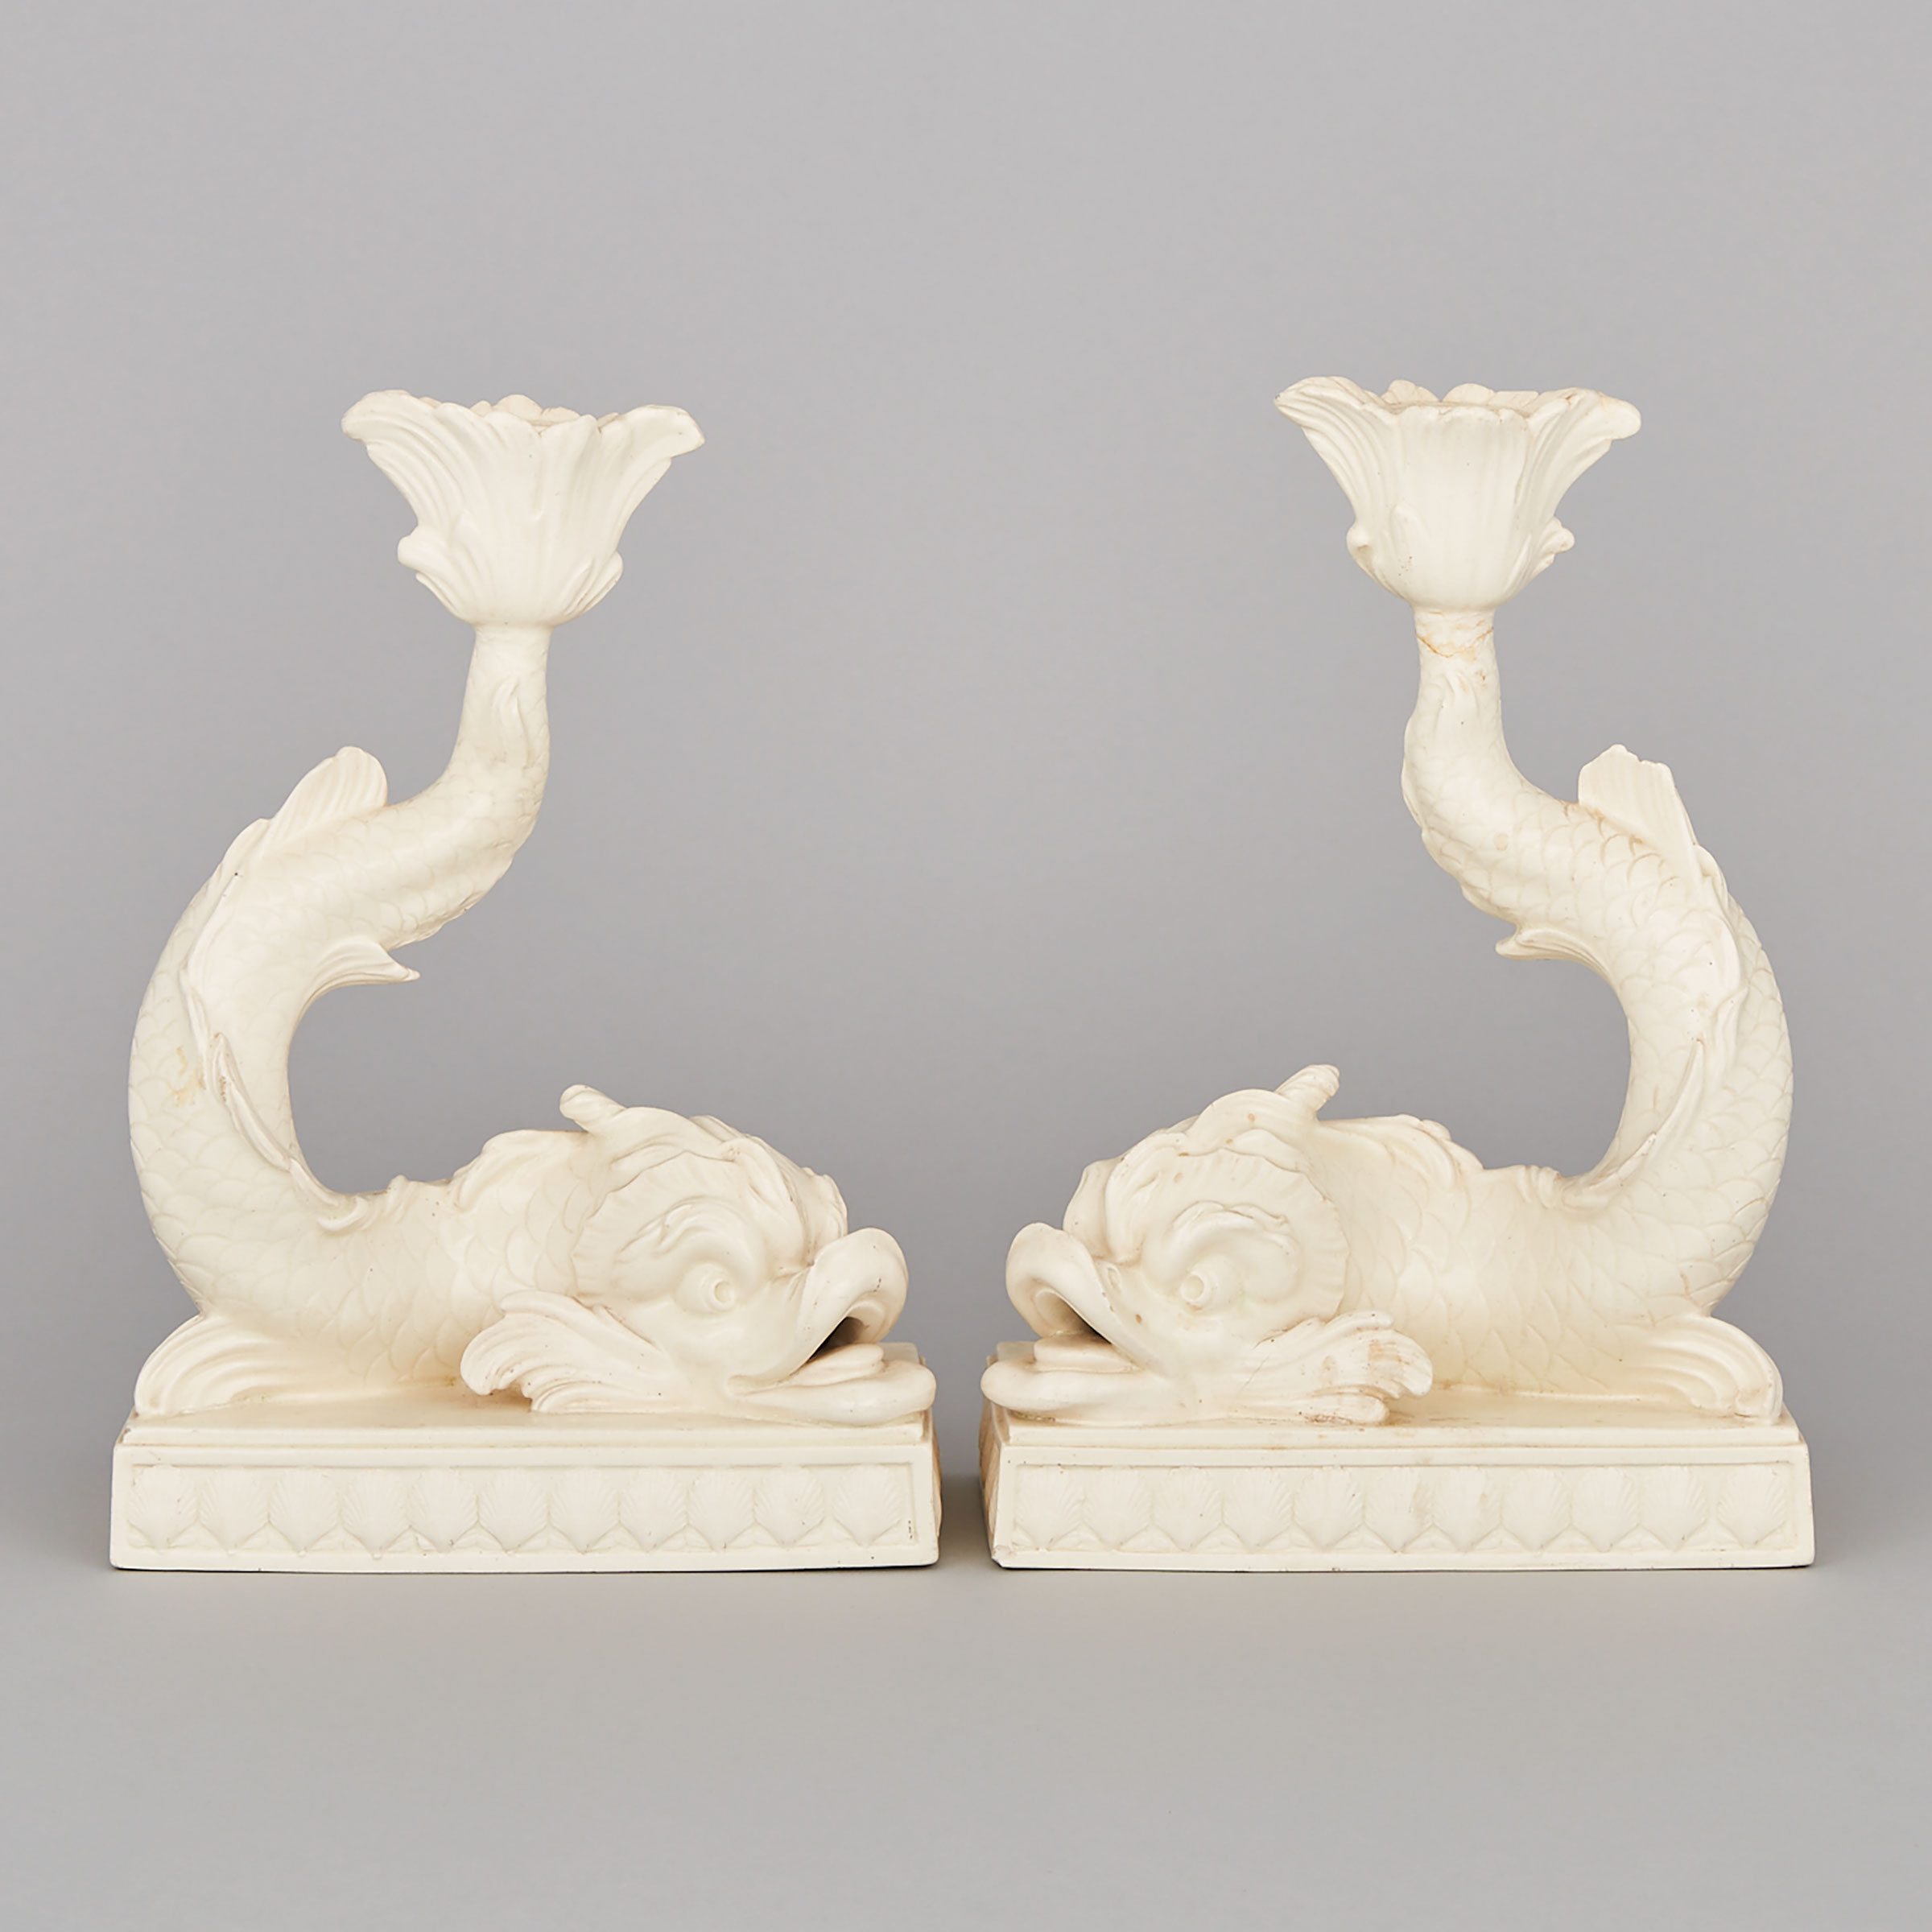 Pair of Wedgwood Queen’s Ware Dolphin Candlesticks, early 20th century